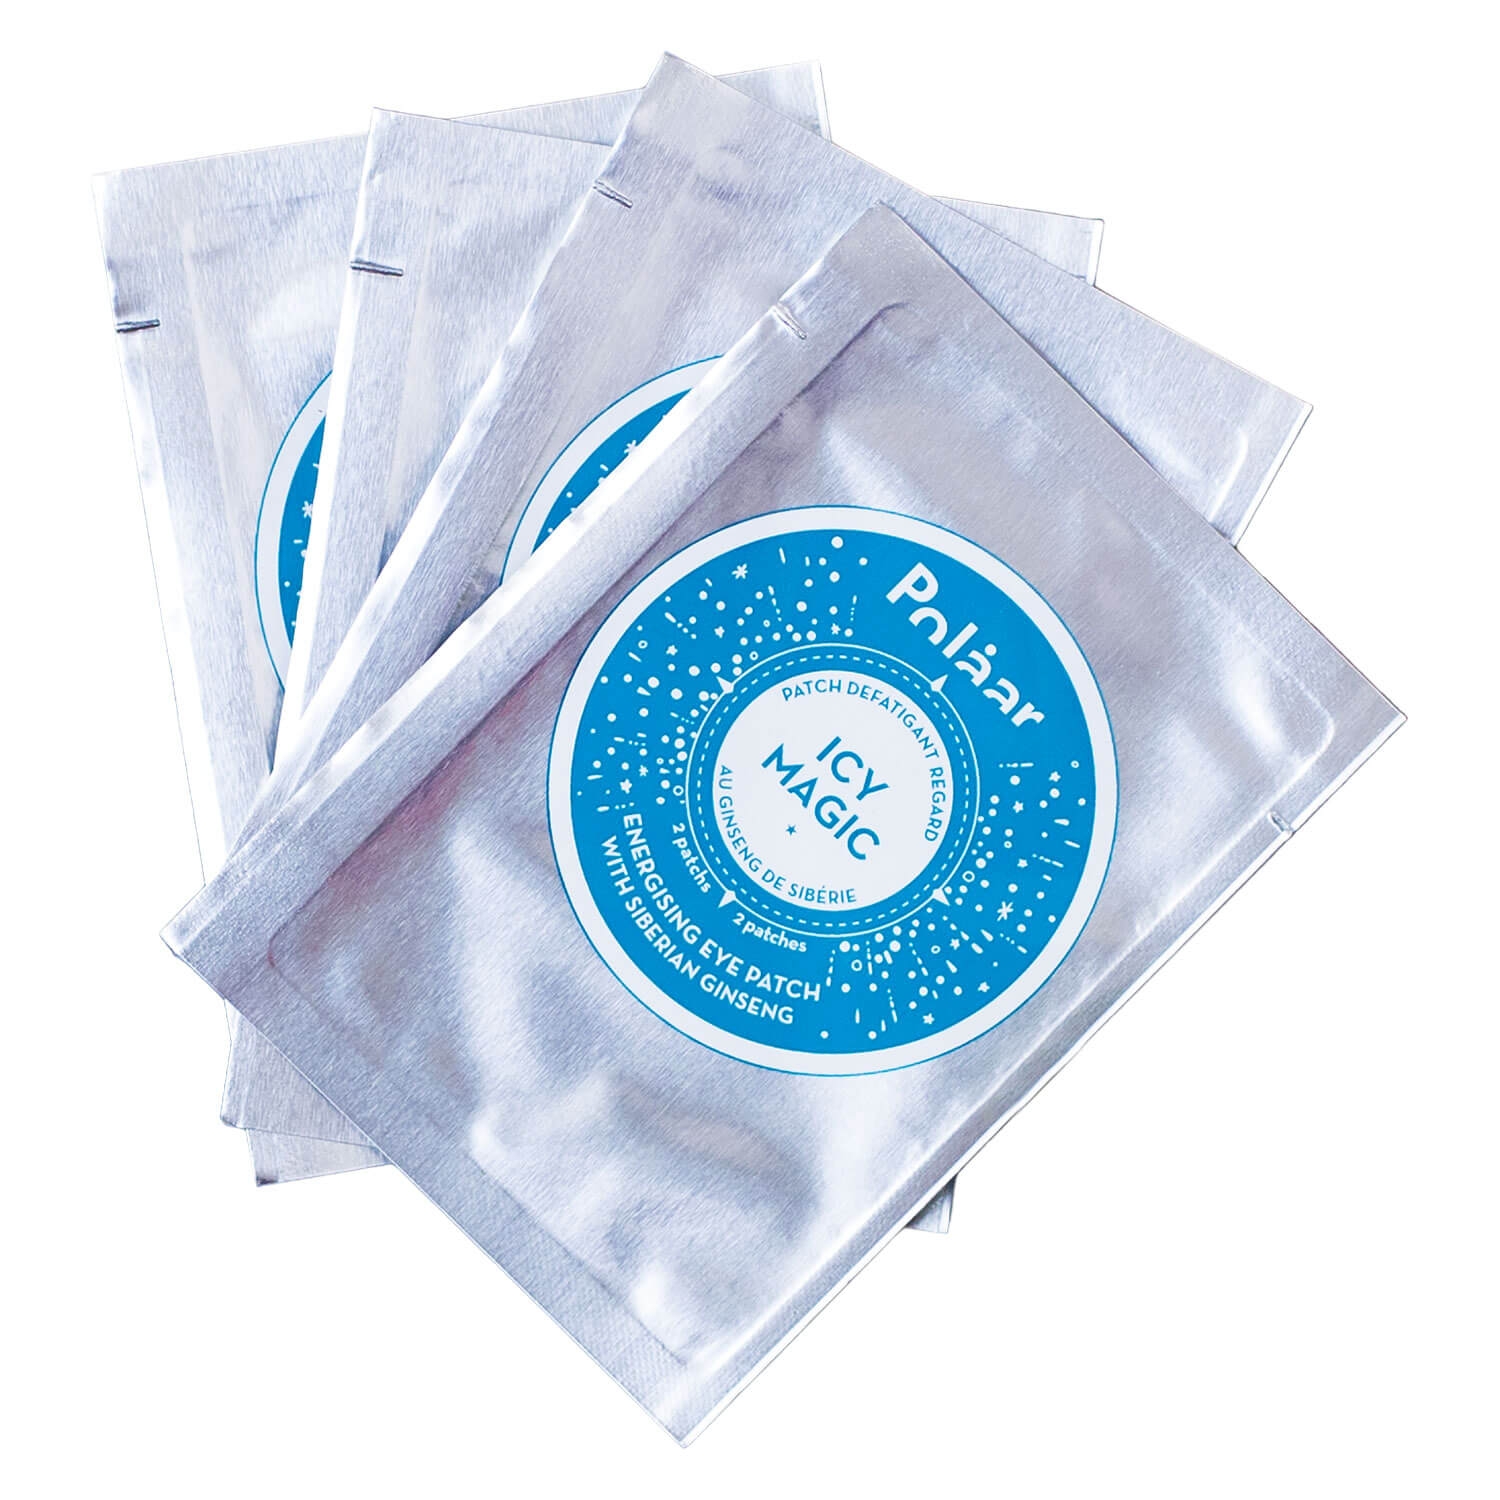 Product image from Polaar - Icy Magic Energizing Eye Patch with Siberian Ginseng